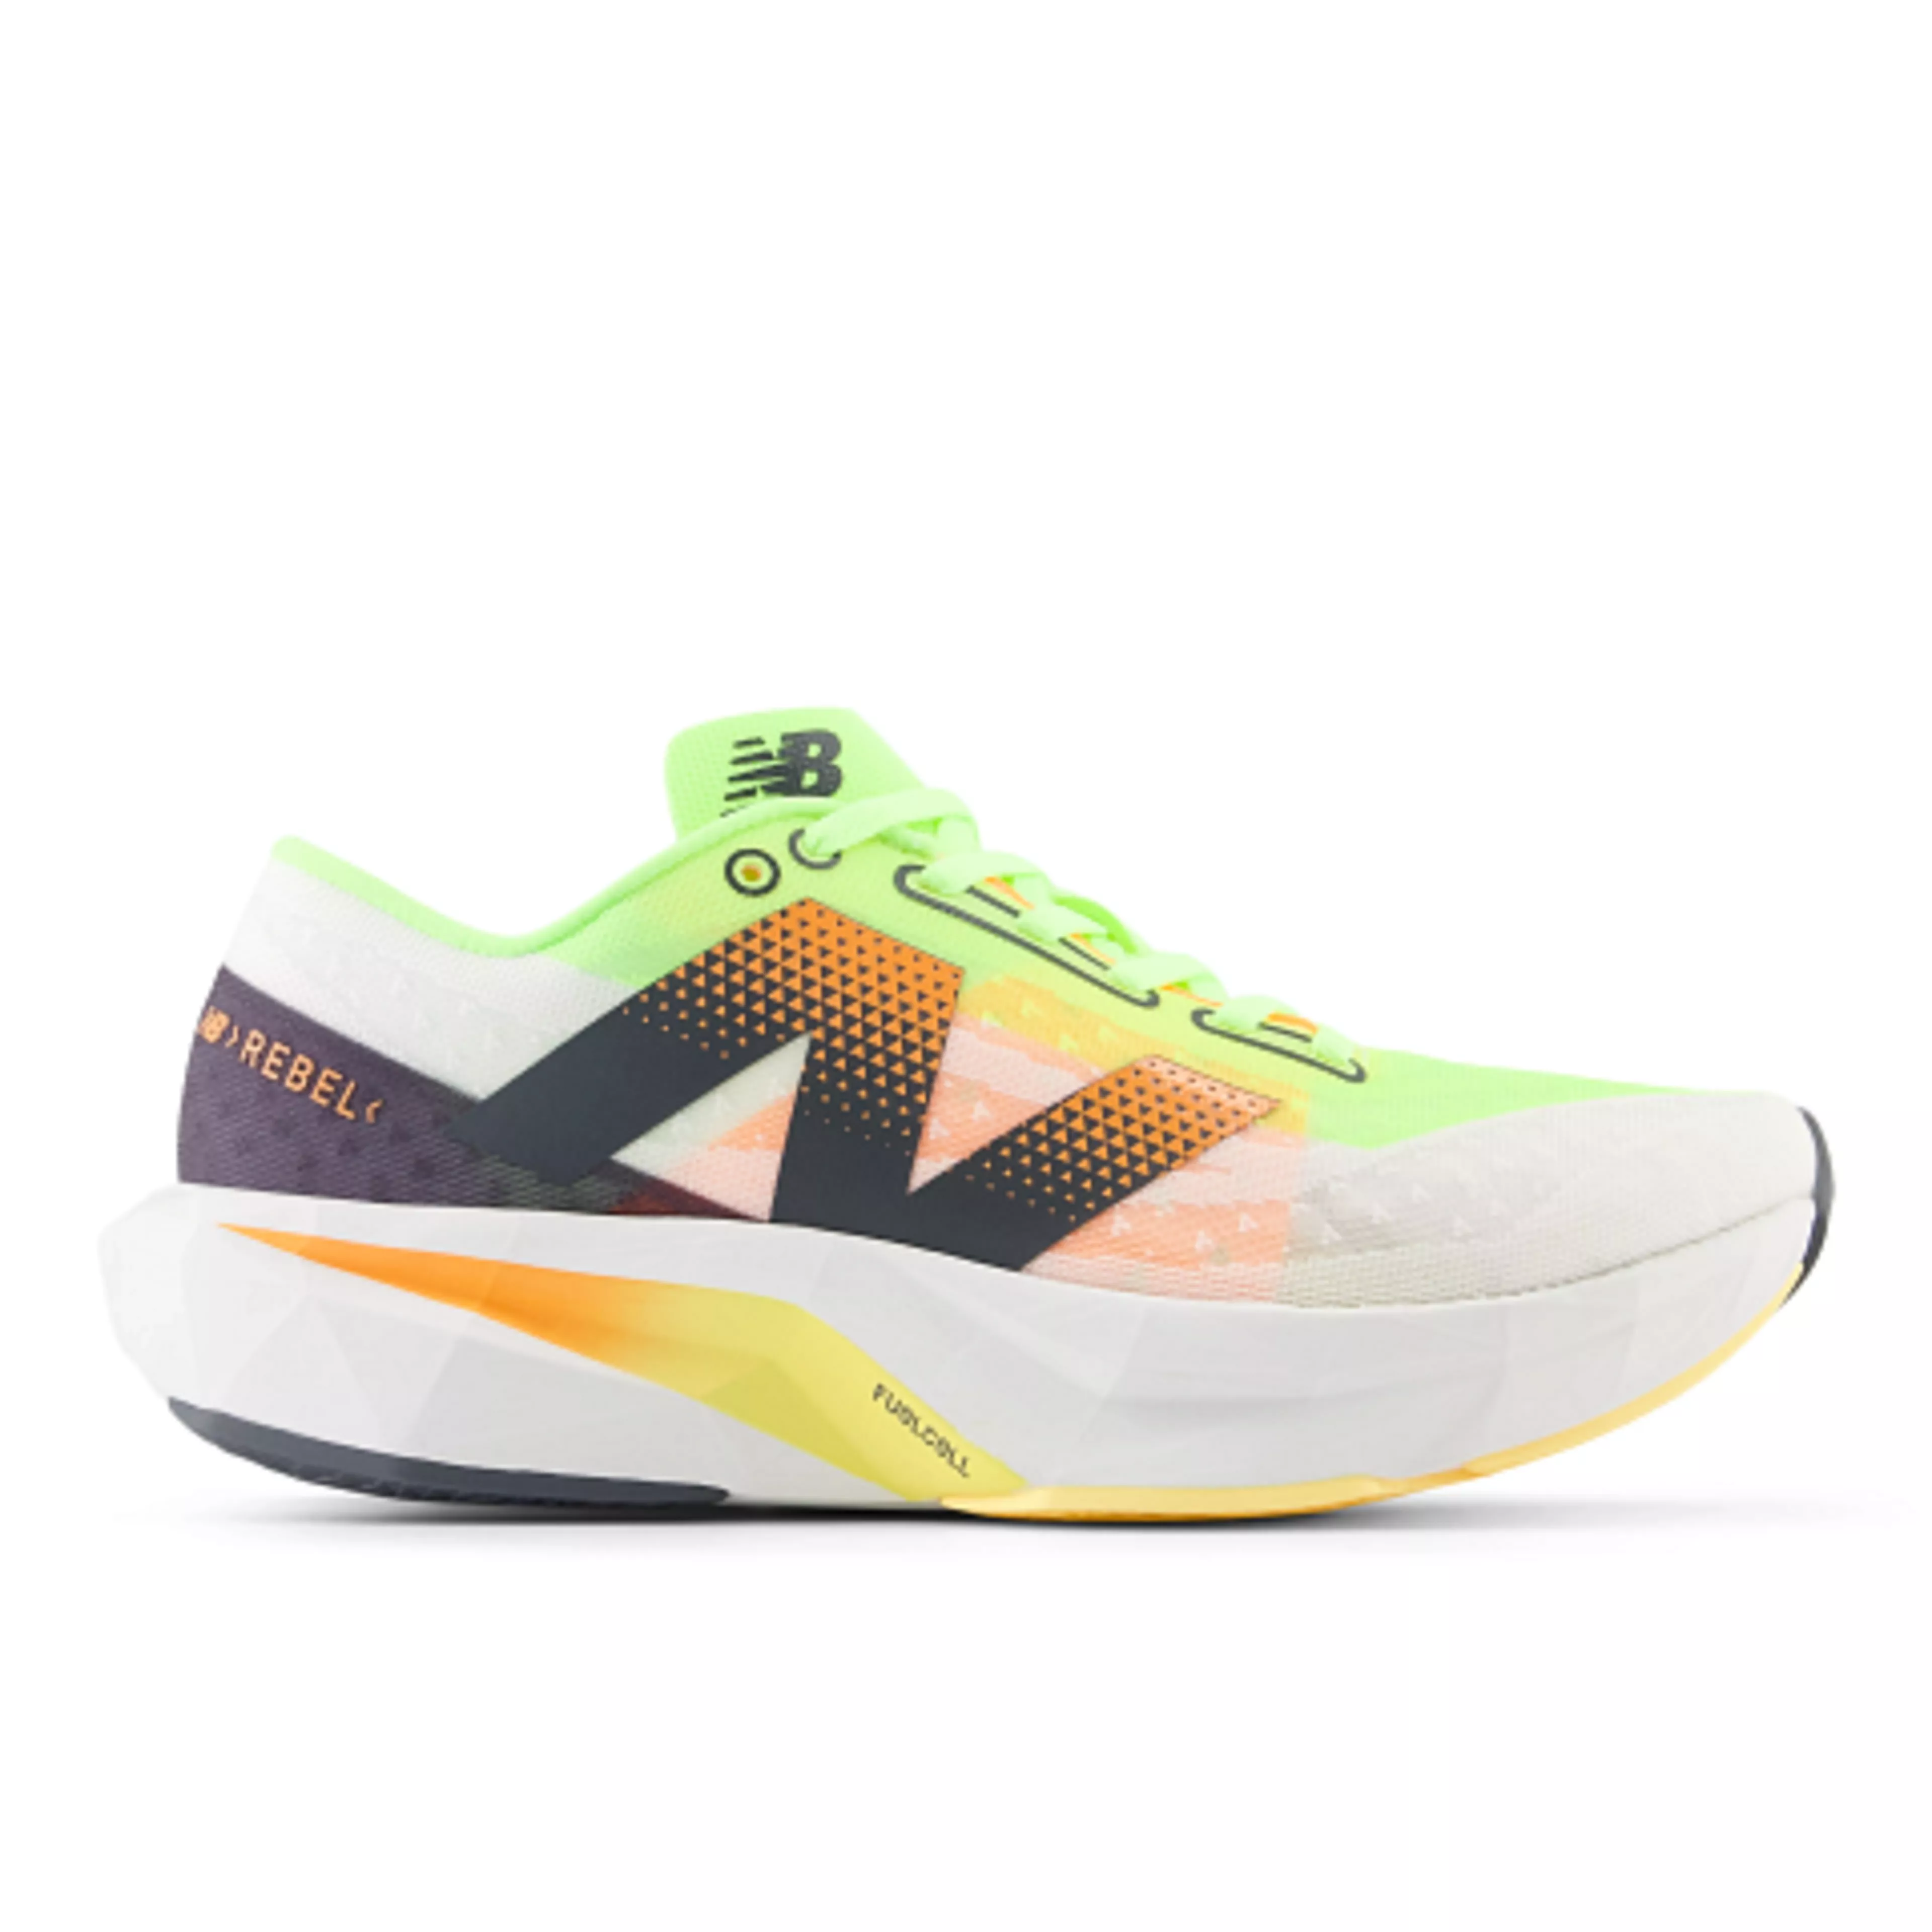 New Balance FuelCell Rebel v4